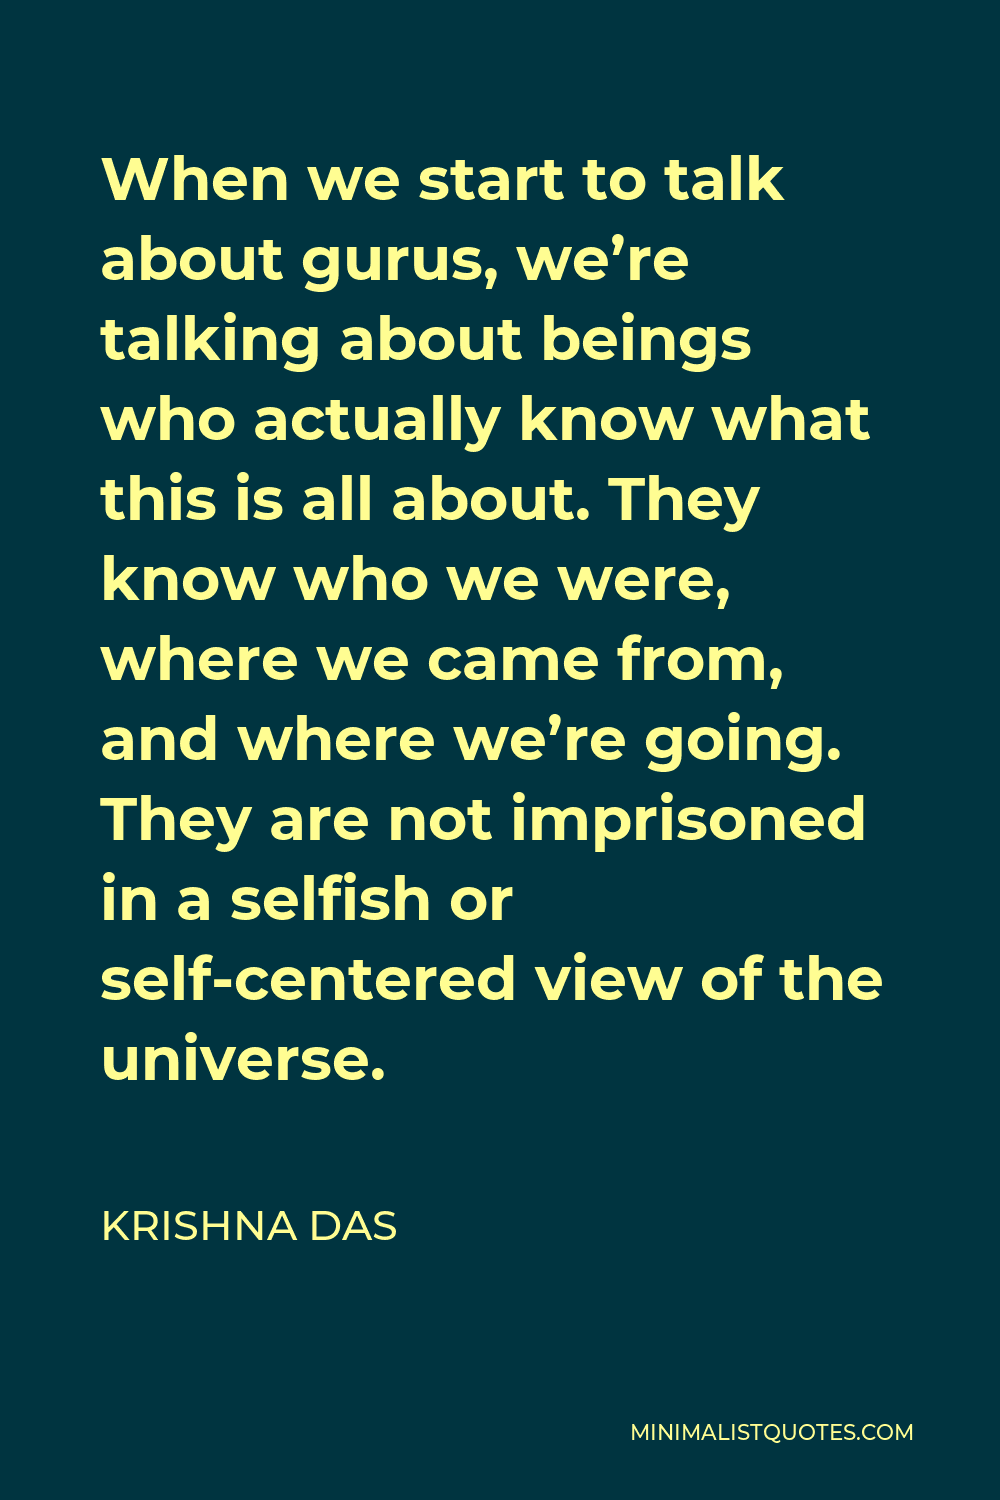 Krishna Das Quote - When we start to talk about gurus, we’re talking about beings who actually know what this is all about. They know who we were, where we came from, and where we’re going. They are not imprisoned in a selfish or self-centered view of the universe.